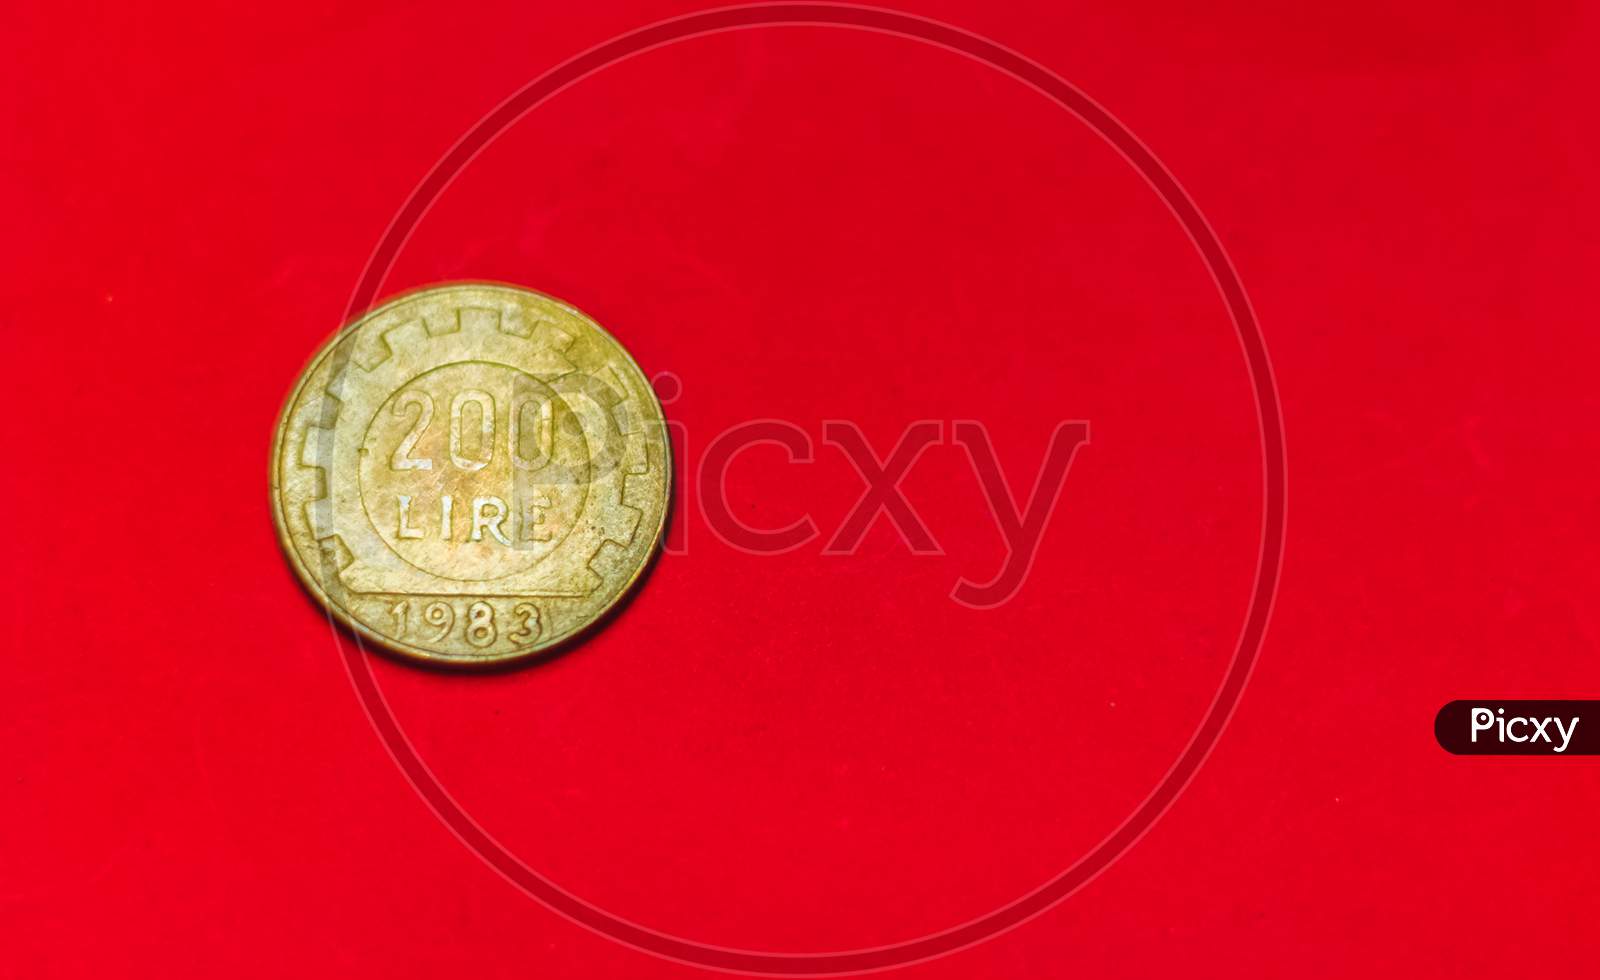 Italian 200 Lire Coin.Front Side Of Old Used Two Hundred Italian Lire, 1983. Vintage Bronze Coin Isolated On Red Background With Space For Text Copy. Repvbblica Italiana 200